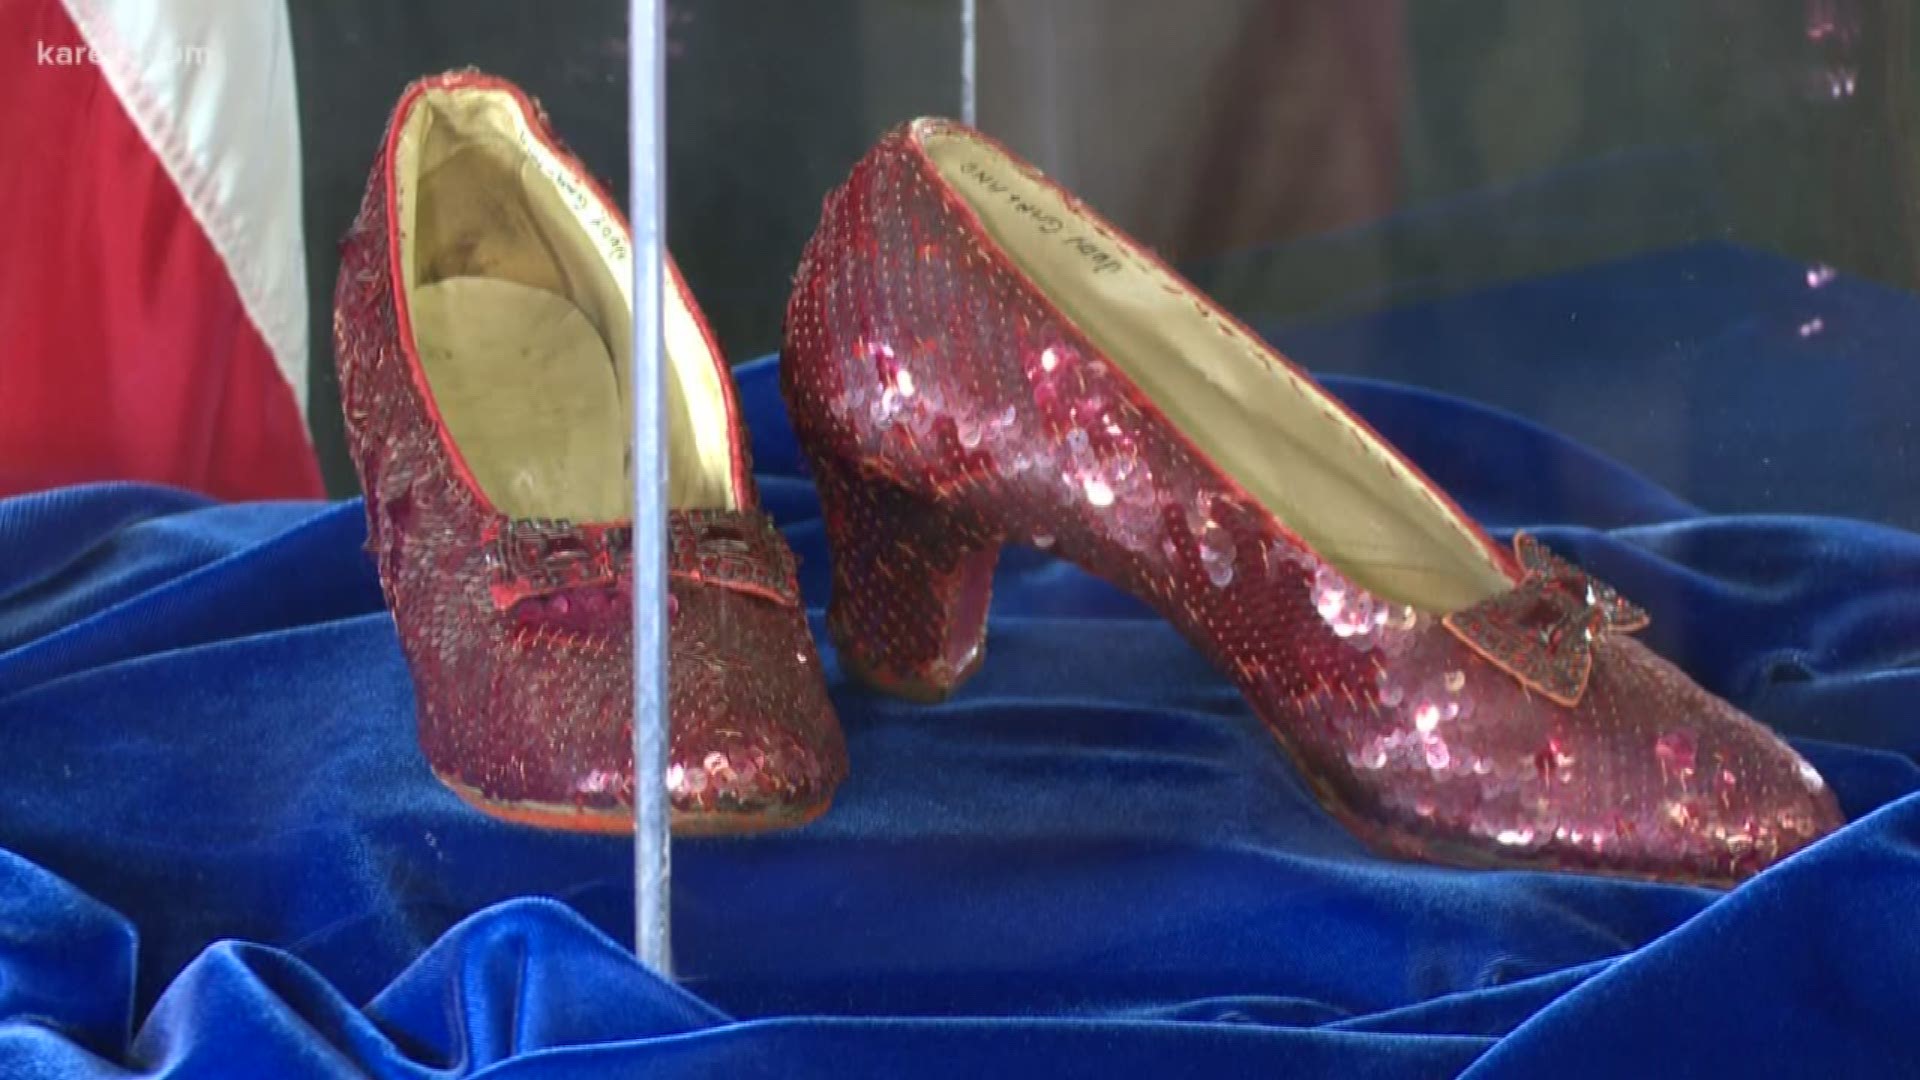 After more than a decade of searching, a pair of ruby slippers stolen from the Judy Garland Museum in Grand Rapids have apparently been found. https://kare11.tv/2oE6uHL